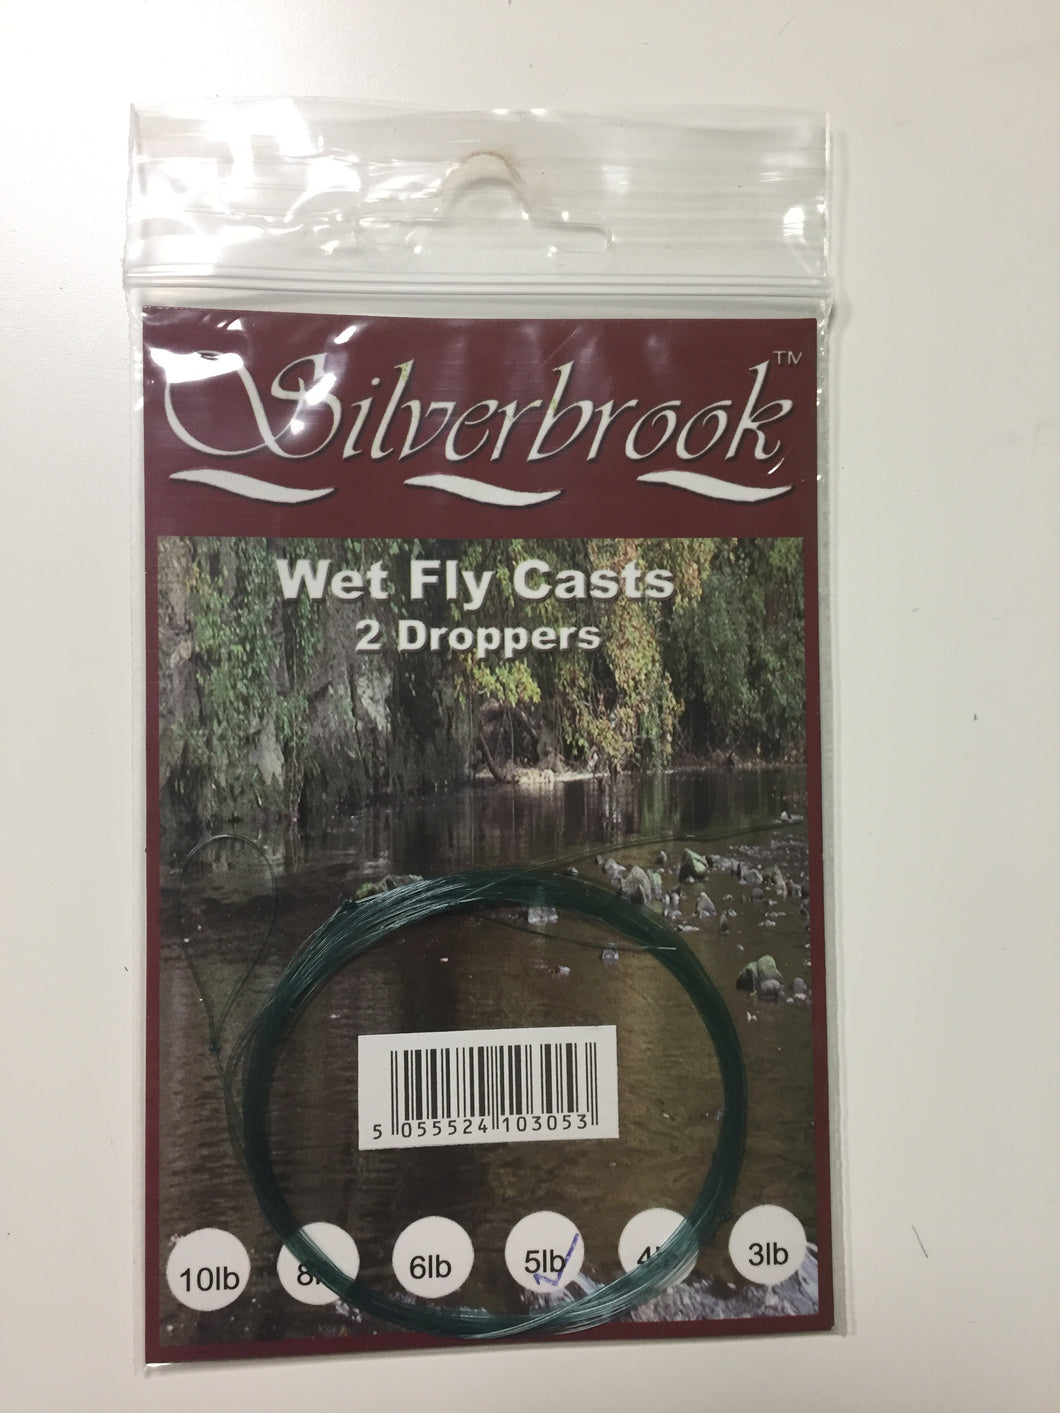 Silverbrook 5lb Wet Fly Casts (2 Droppers)